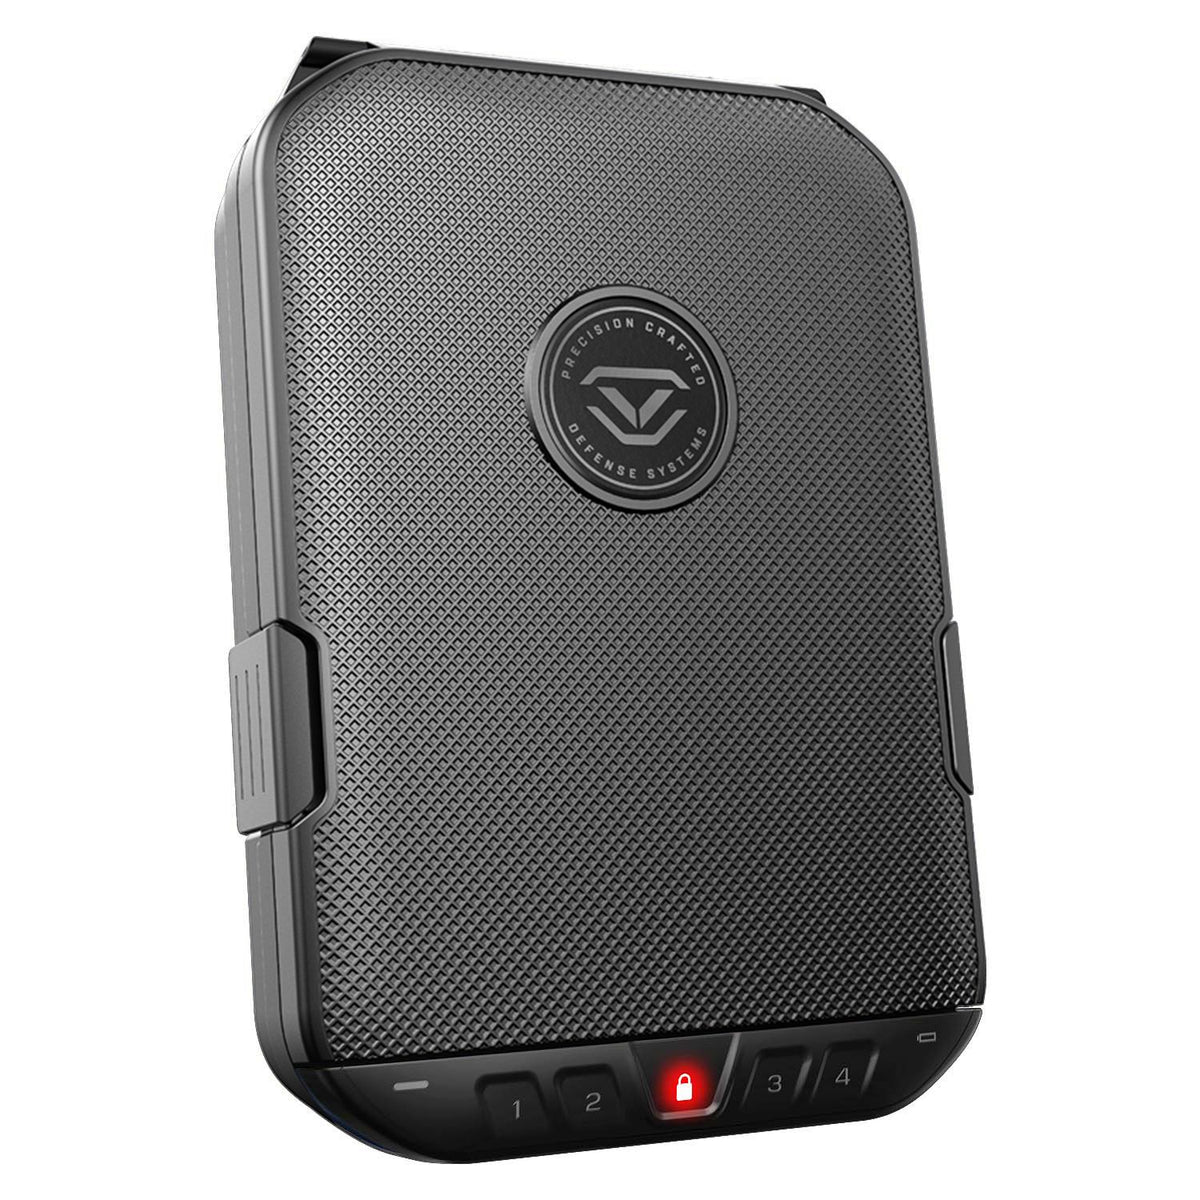 Vaultek Special Edition Lifepod 2.0 Rugged Airtight Water Resistant Safe with Built-in Lock GunMetal Gray